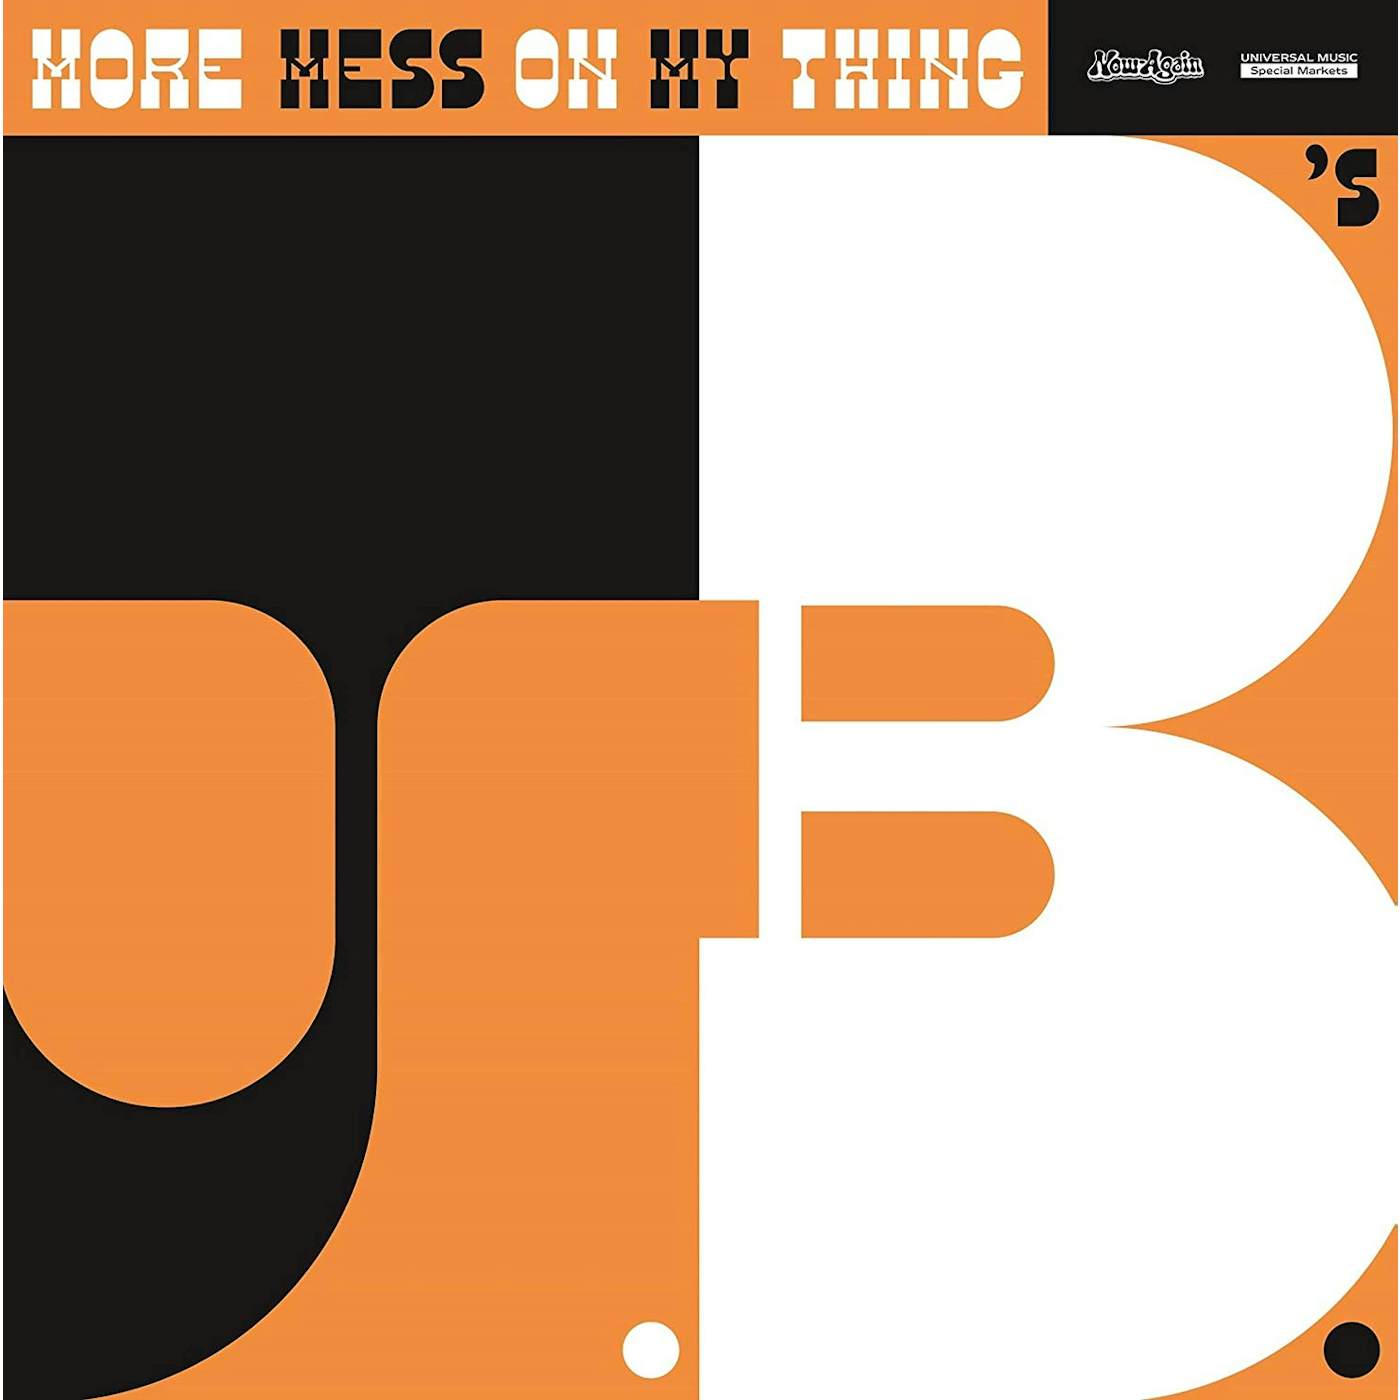 The J.B.'s MORE MESS ON MY THING CD